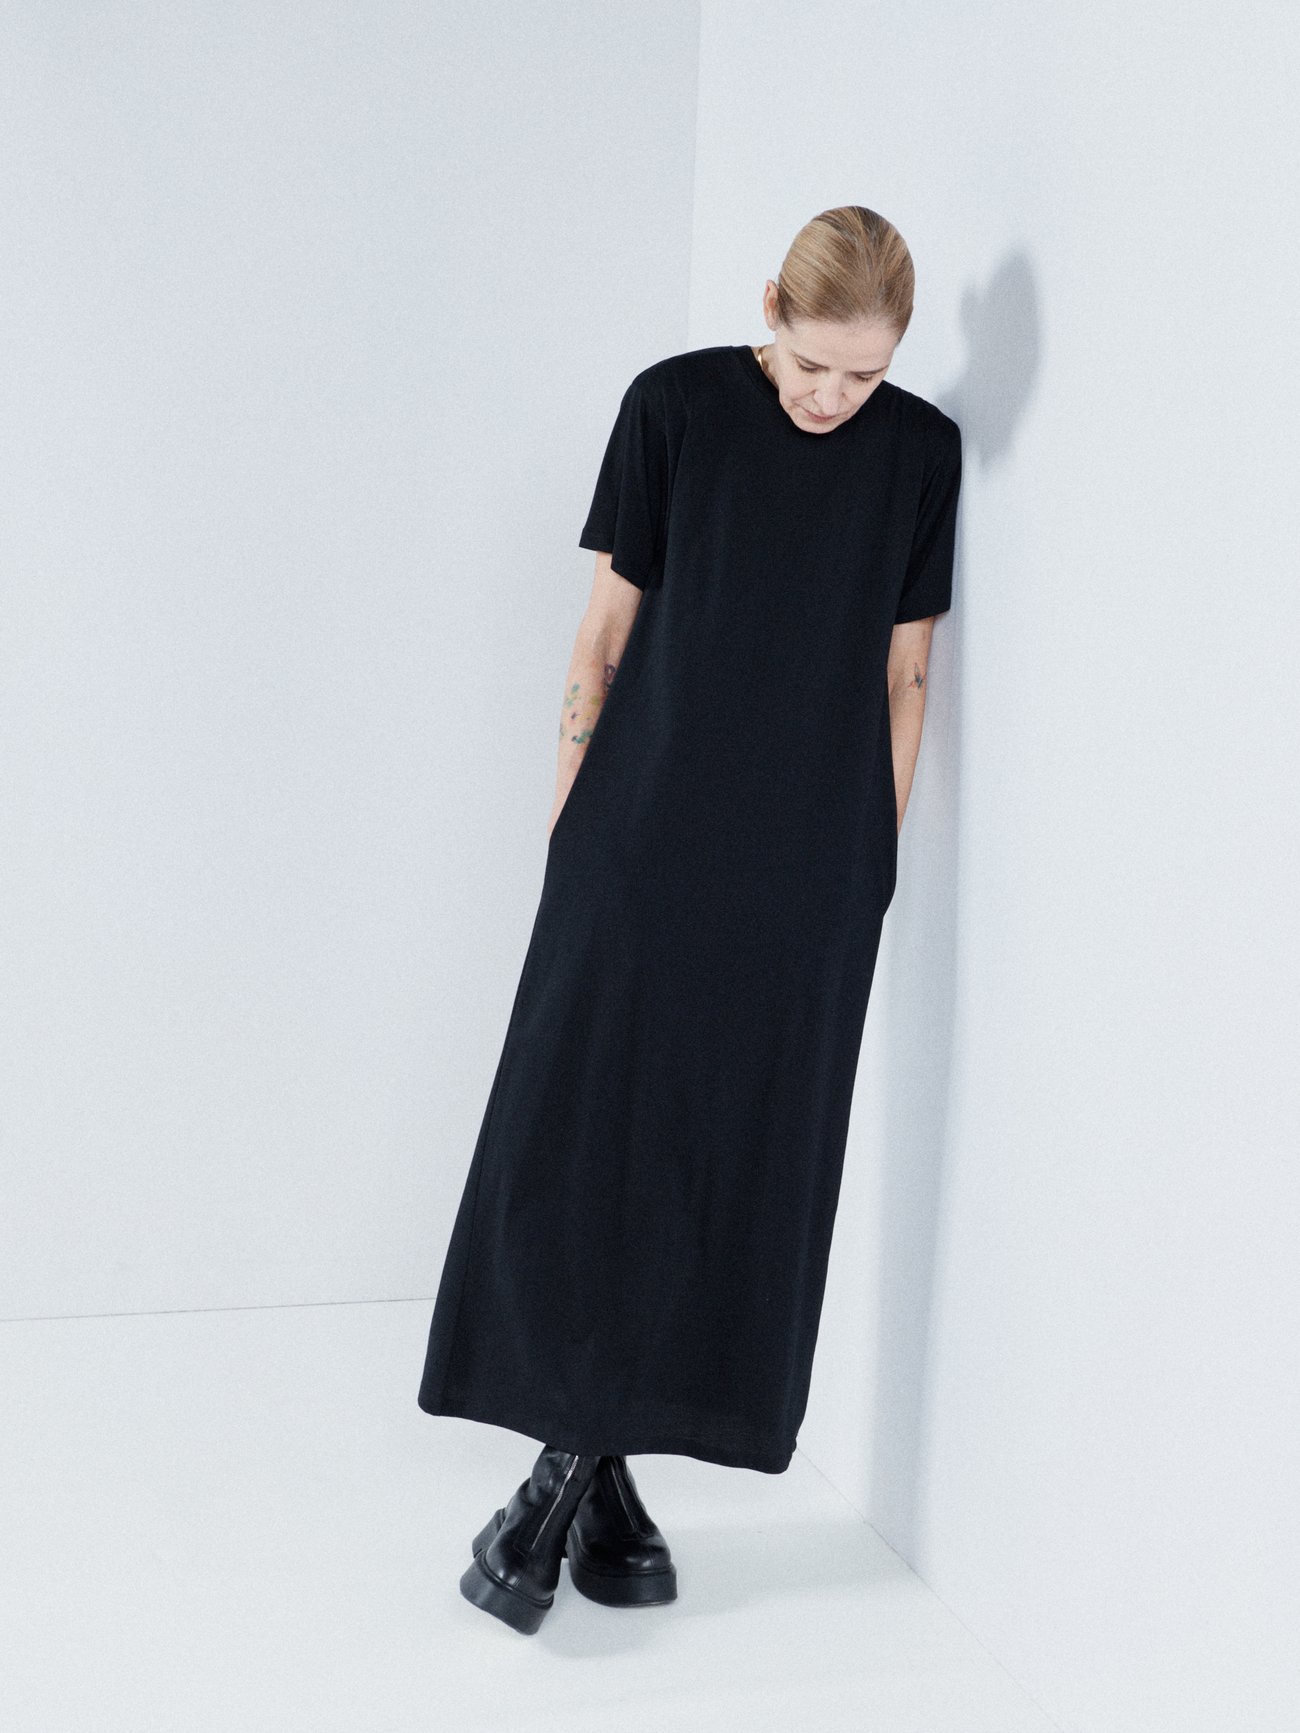 Wardrobe basics are given a relaxed feel by Raey showcased by this black T-shirt dress, made from a recycled cotton-blend jersey with dropped shoulders.